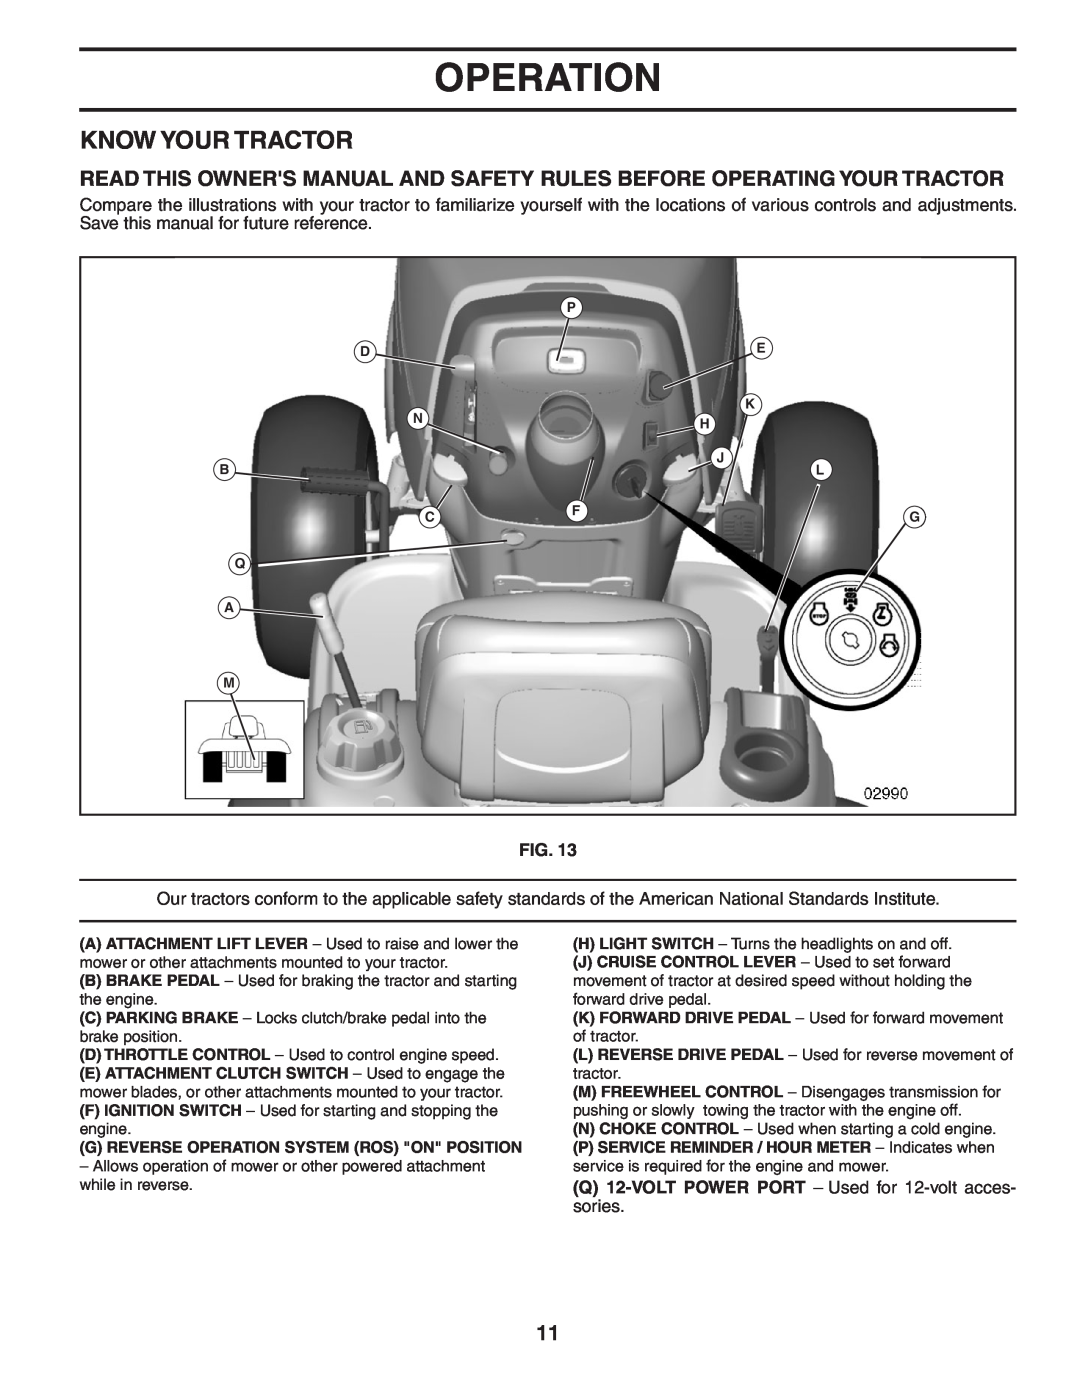 Poulan 405035 manual Know Your Tractor, Operation 